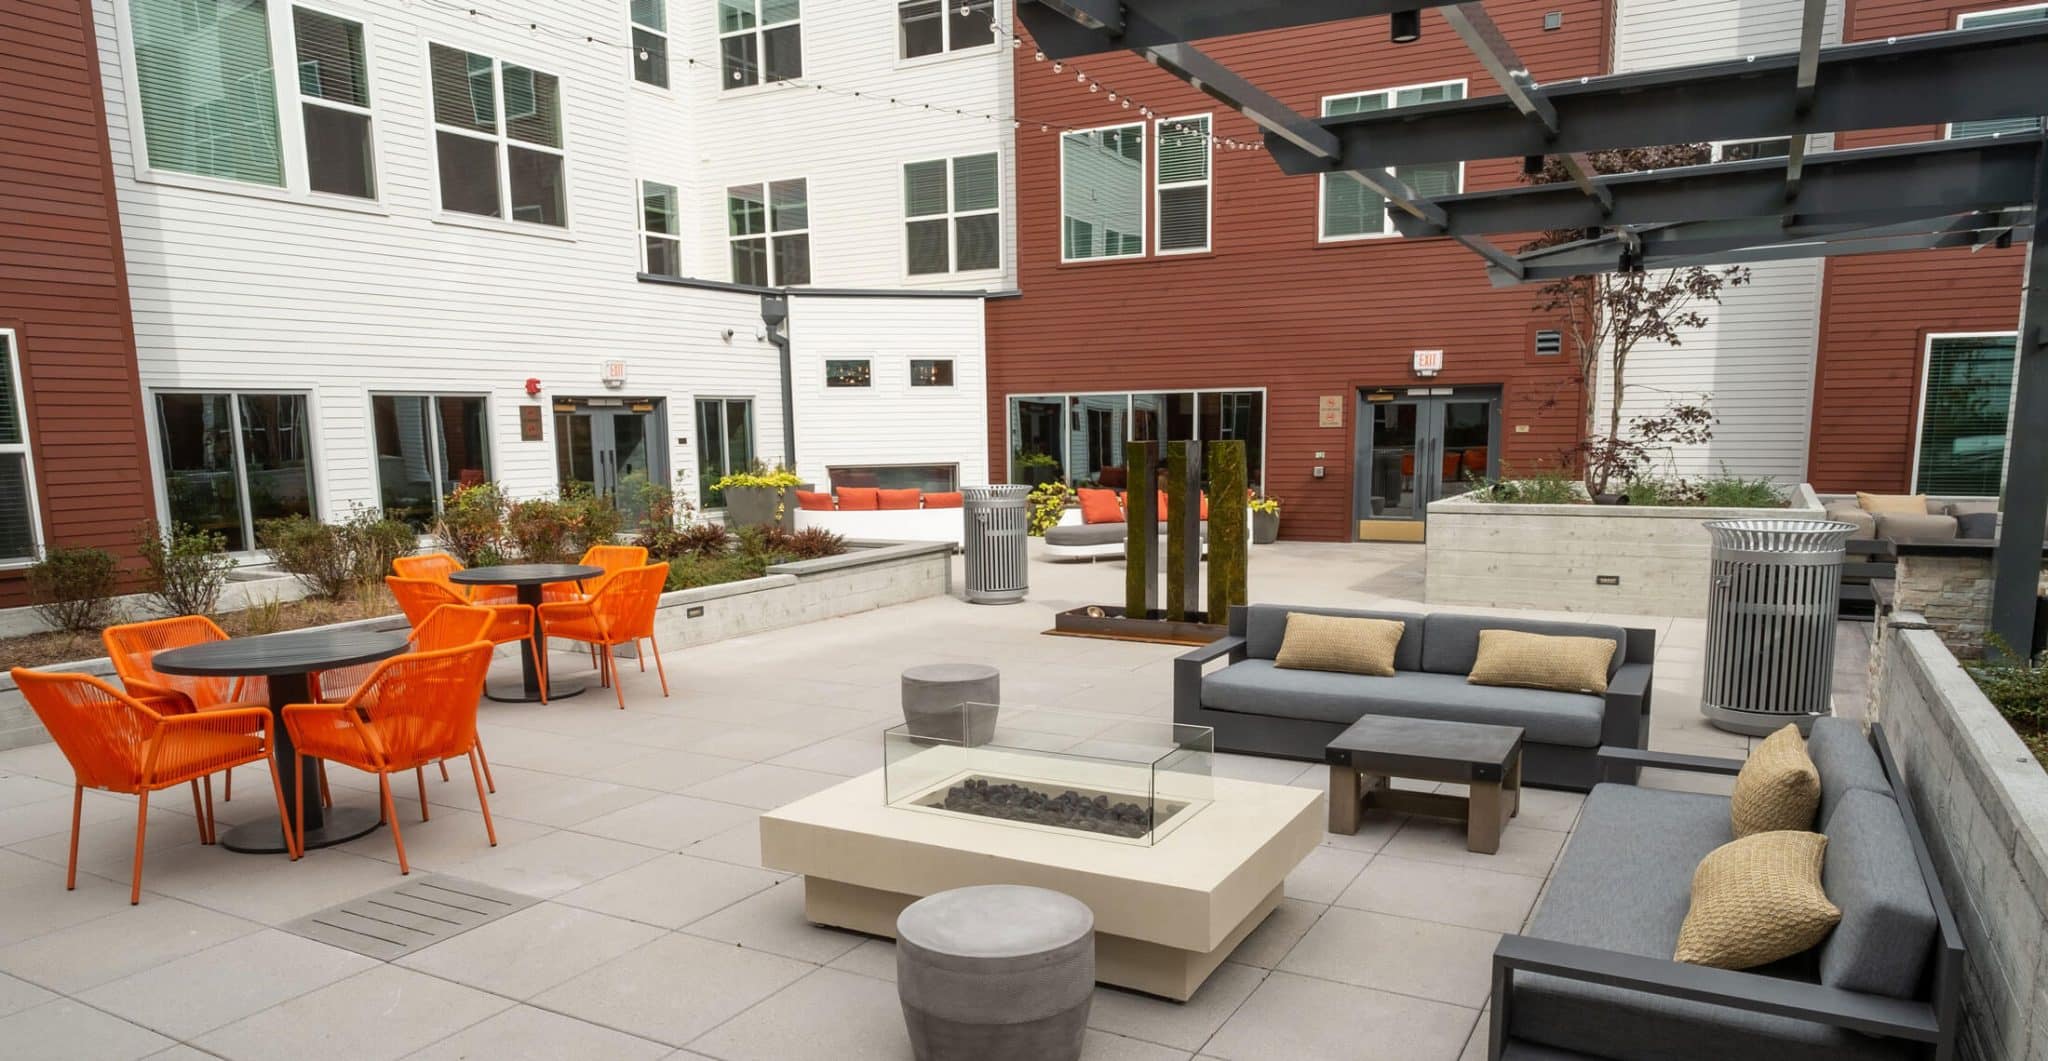 Studio 3807 Courtyard that includes grilling kitchens and fire pits